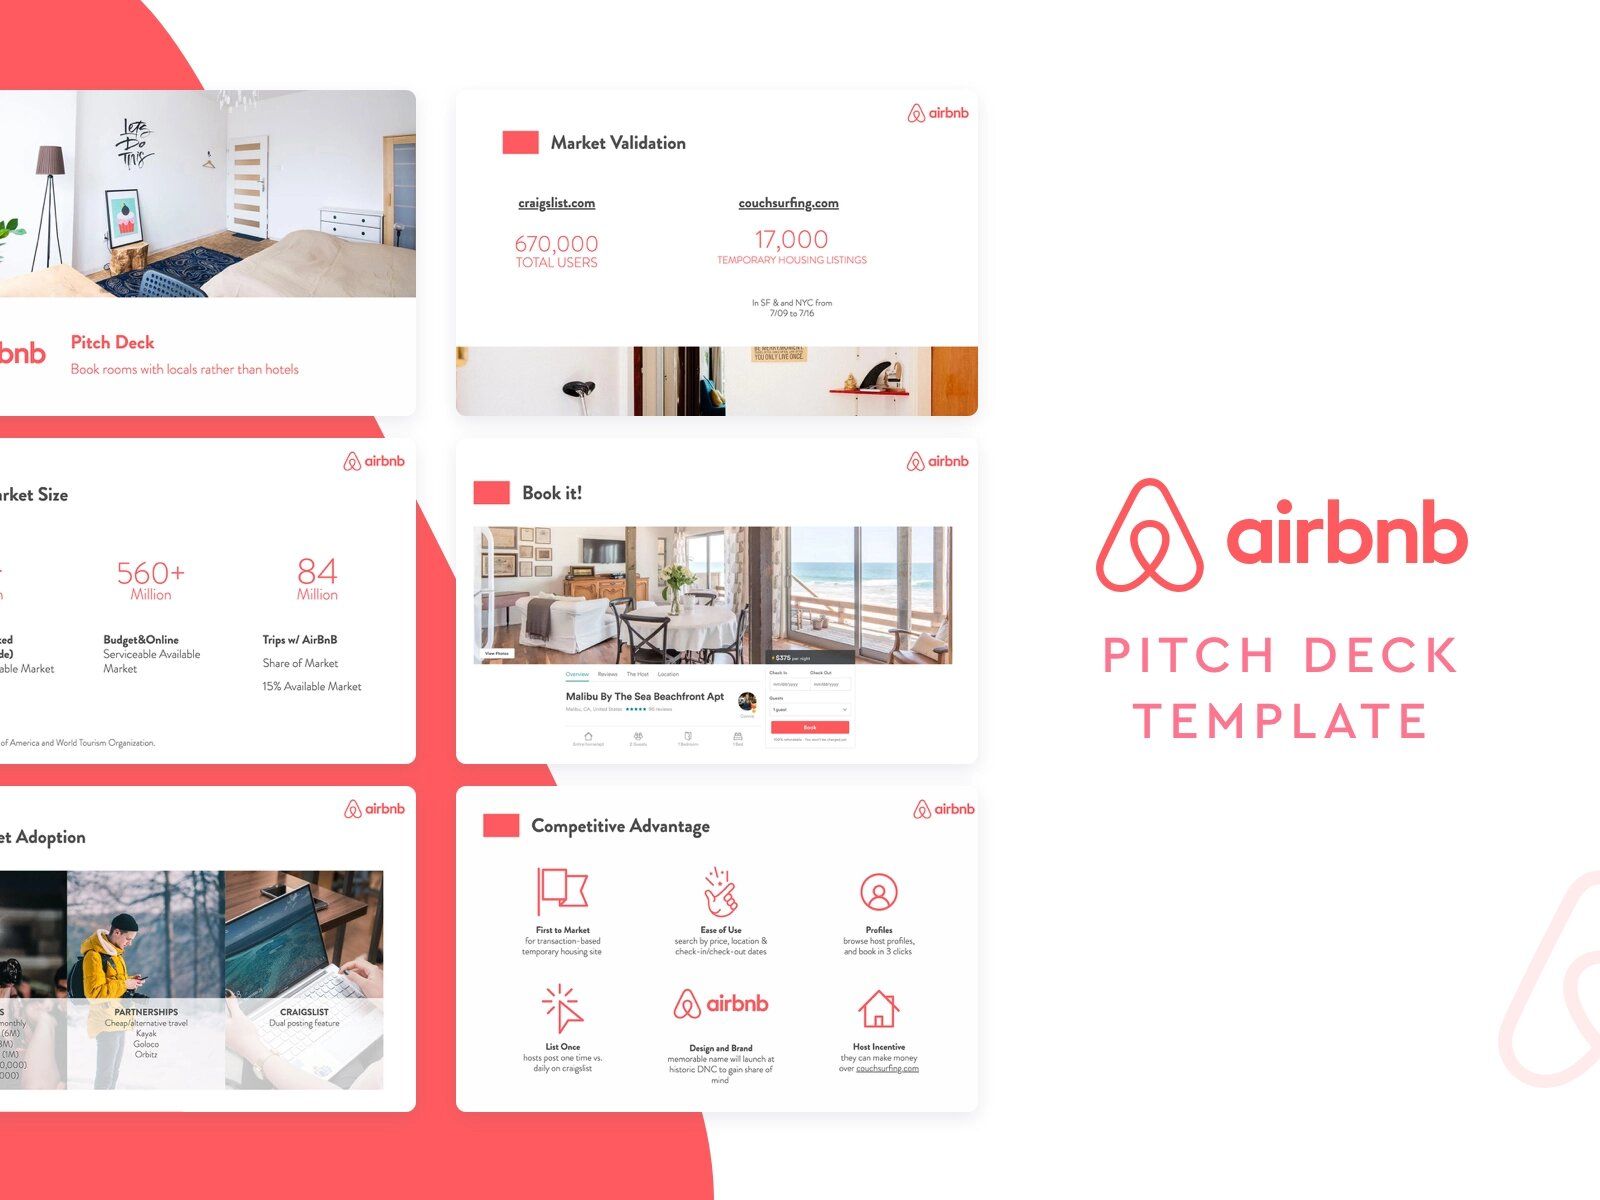 Go talking to investors when you already have something to demonstrate, like Airbnb did 